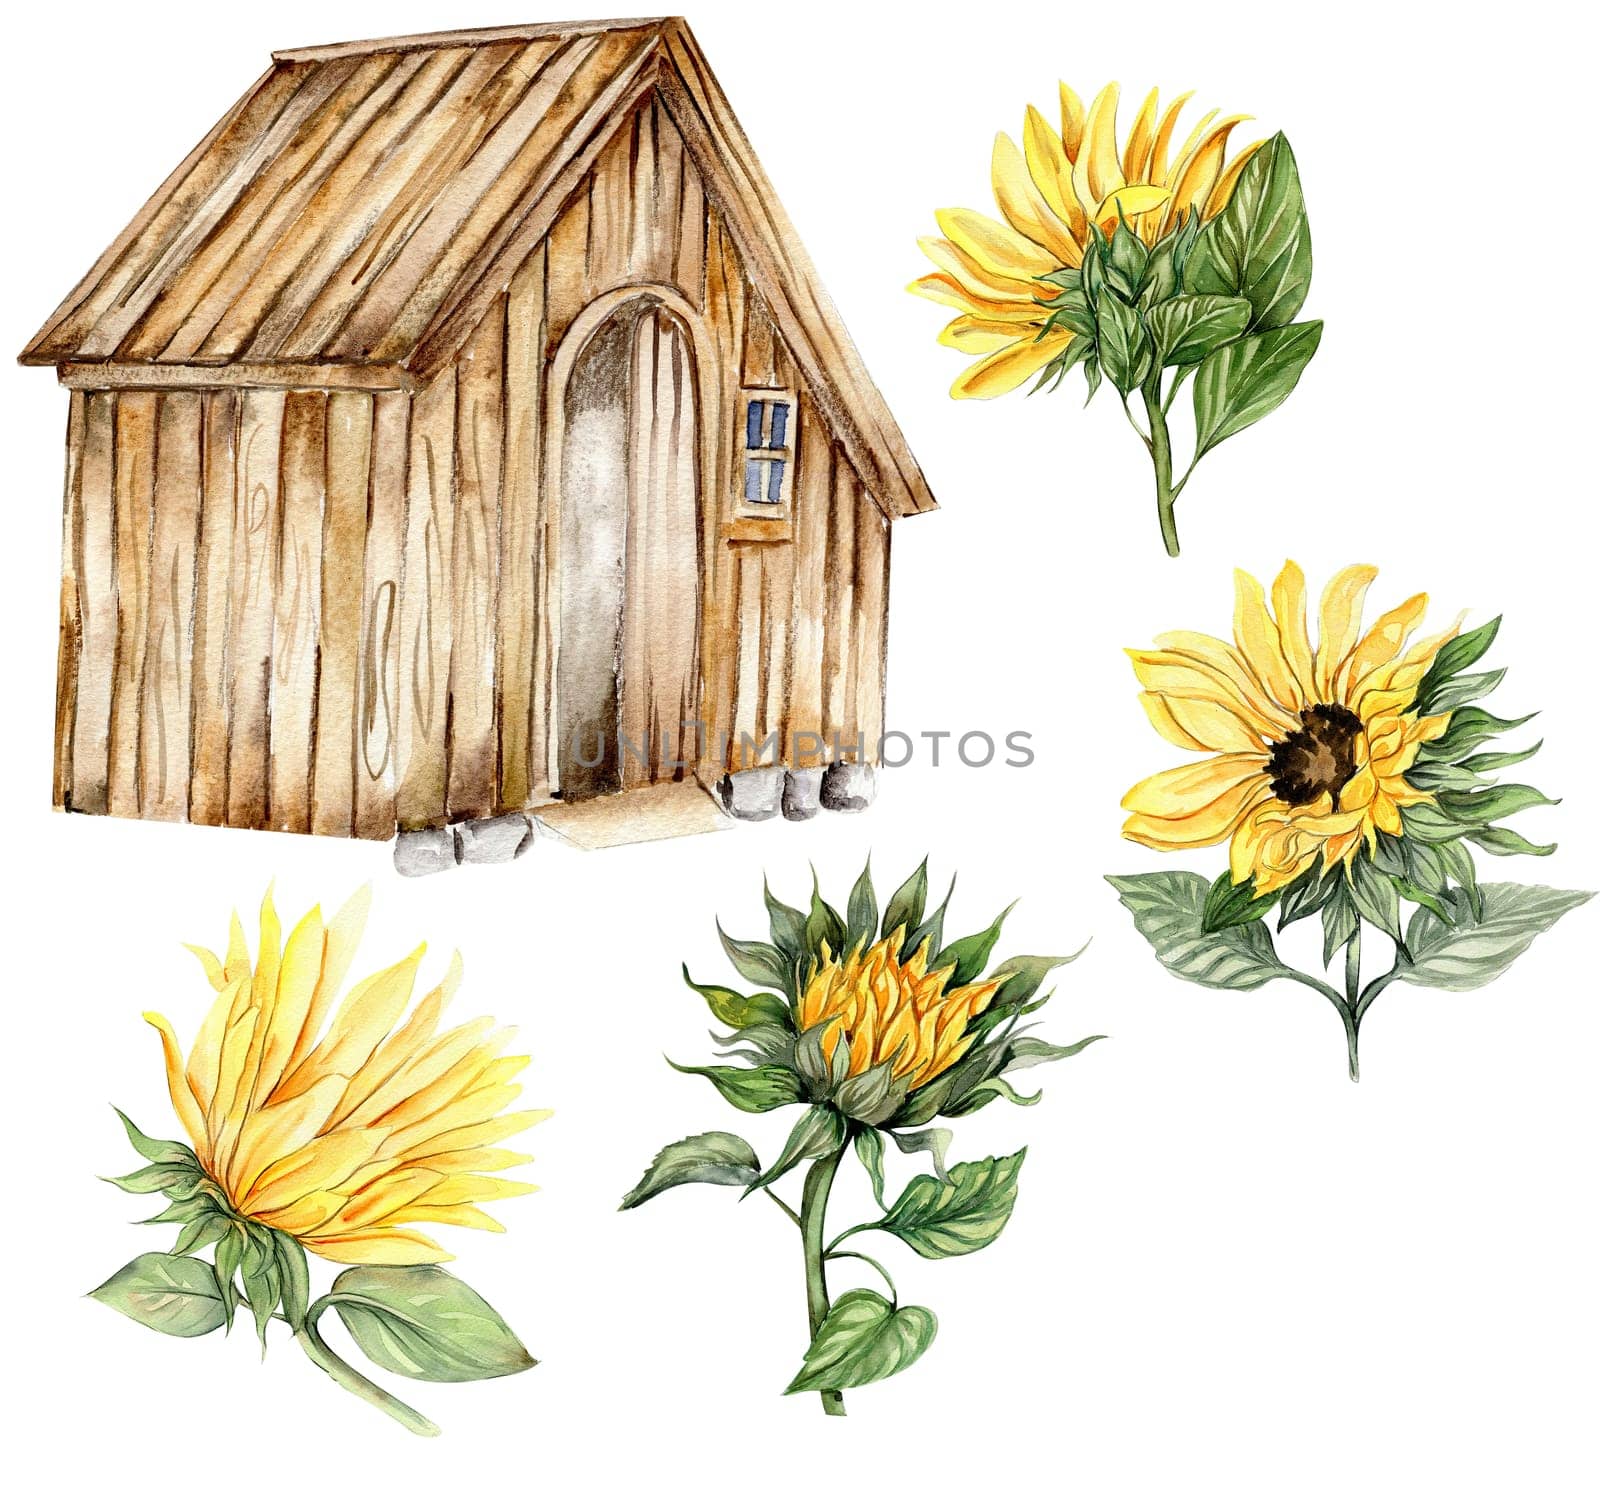 Watercolor wooden farmhouse and sunflowers. Hand drawn illustration of a farm. Perfect for wedding invitation, greetings card, posters. by ArtsByLeila